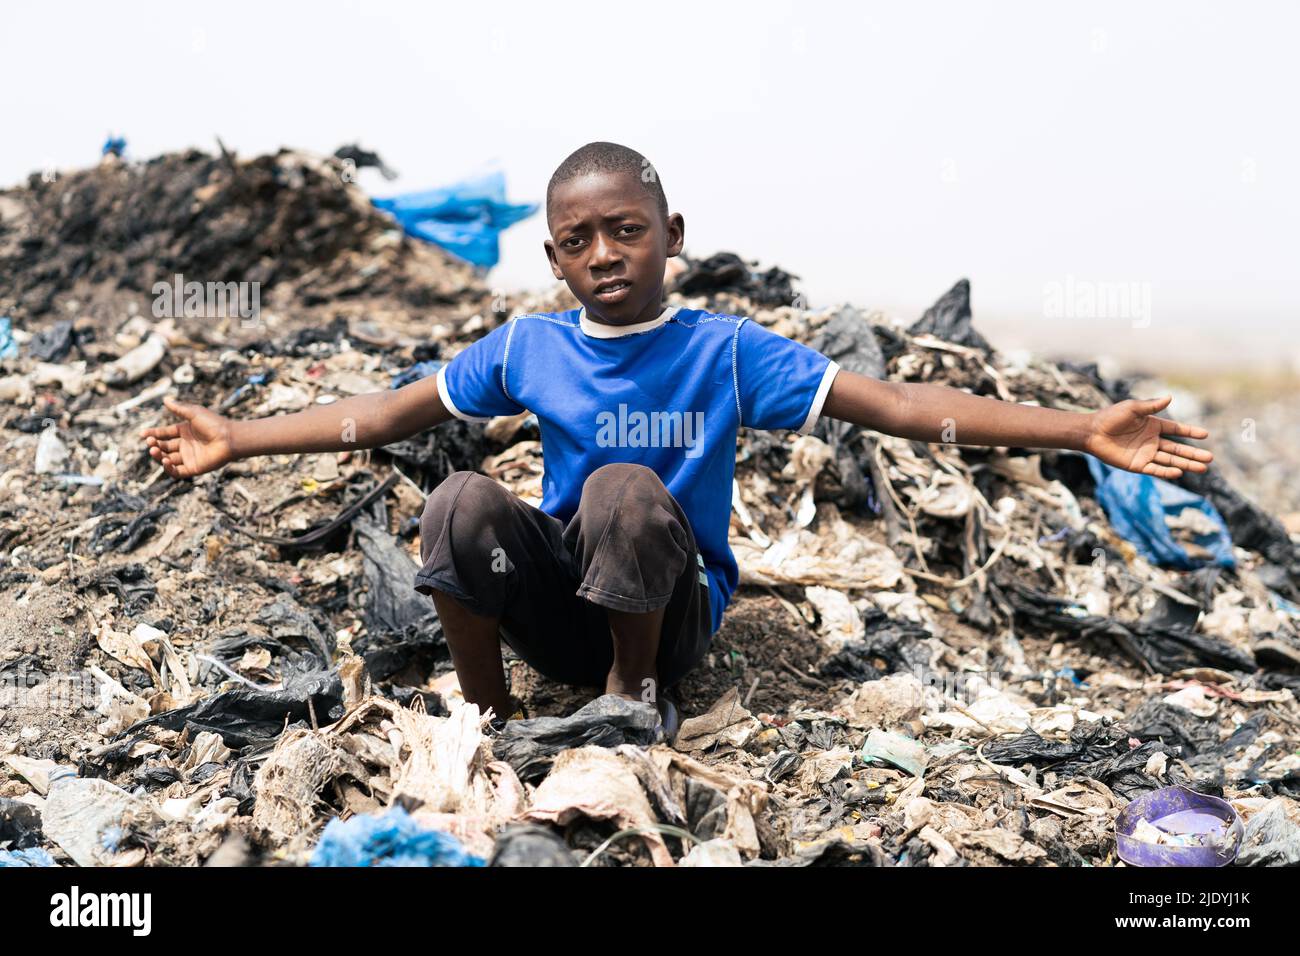 Young black African boy inviting the viewer to contemplate the chaos of garbage, decay and filth around him; symbol of the legacy of previous generati Stock Photo